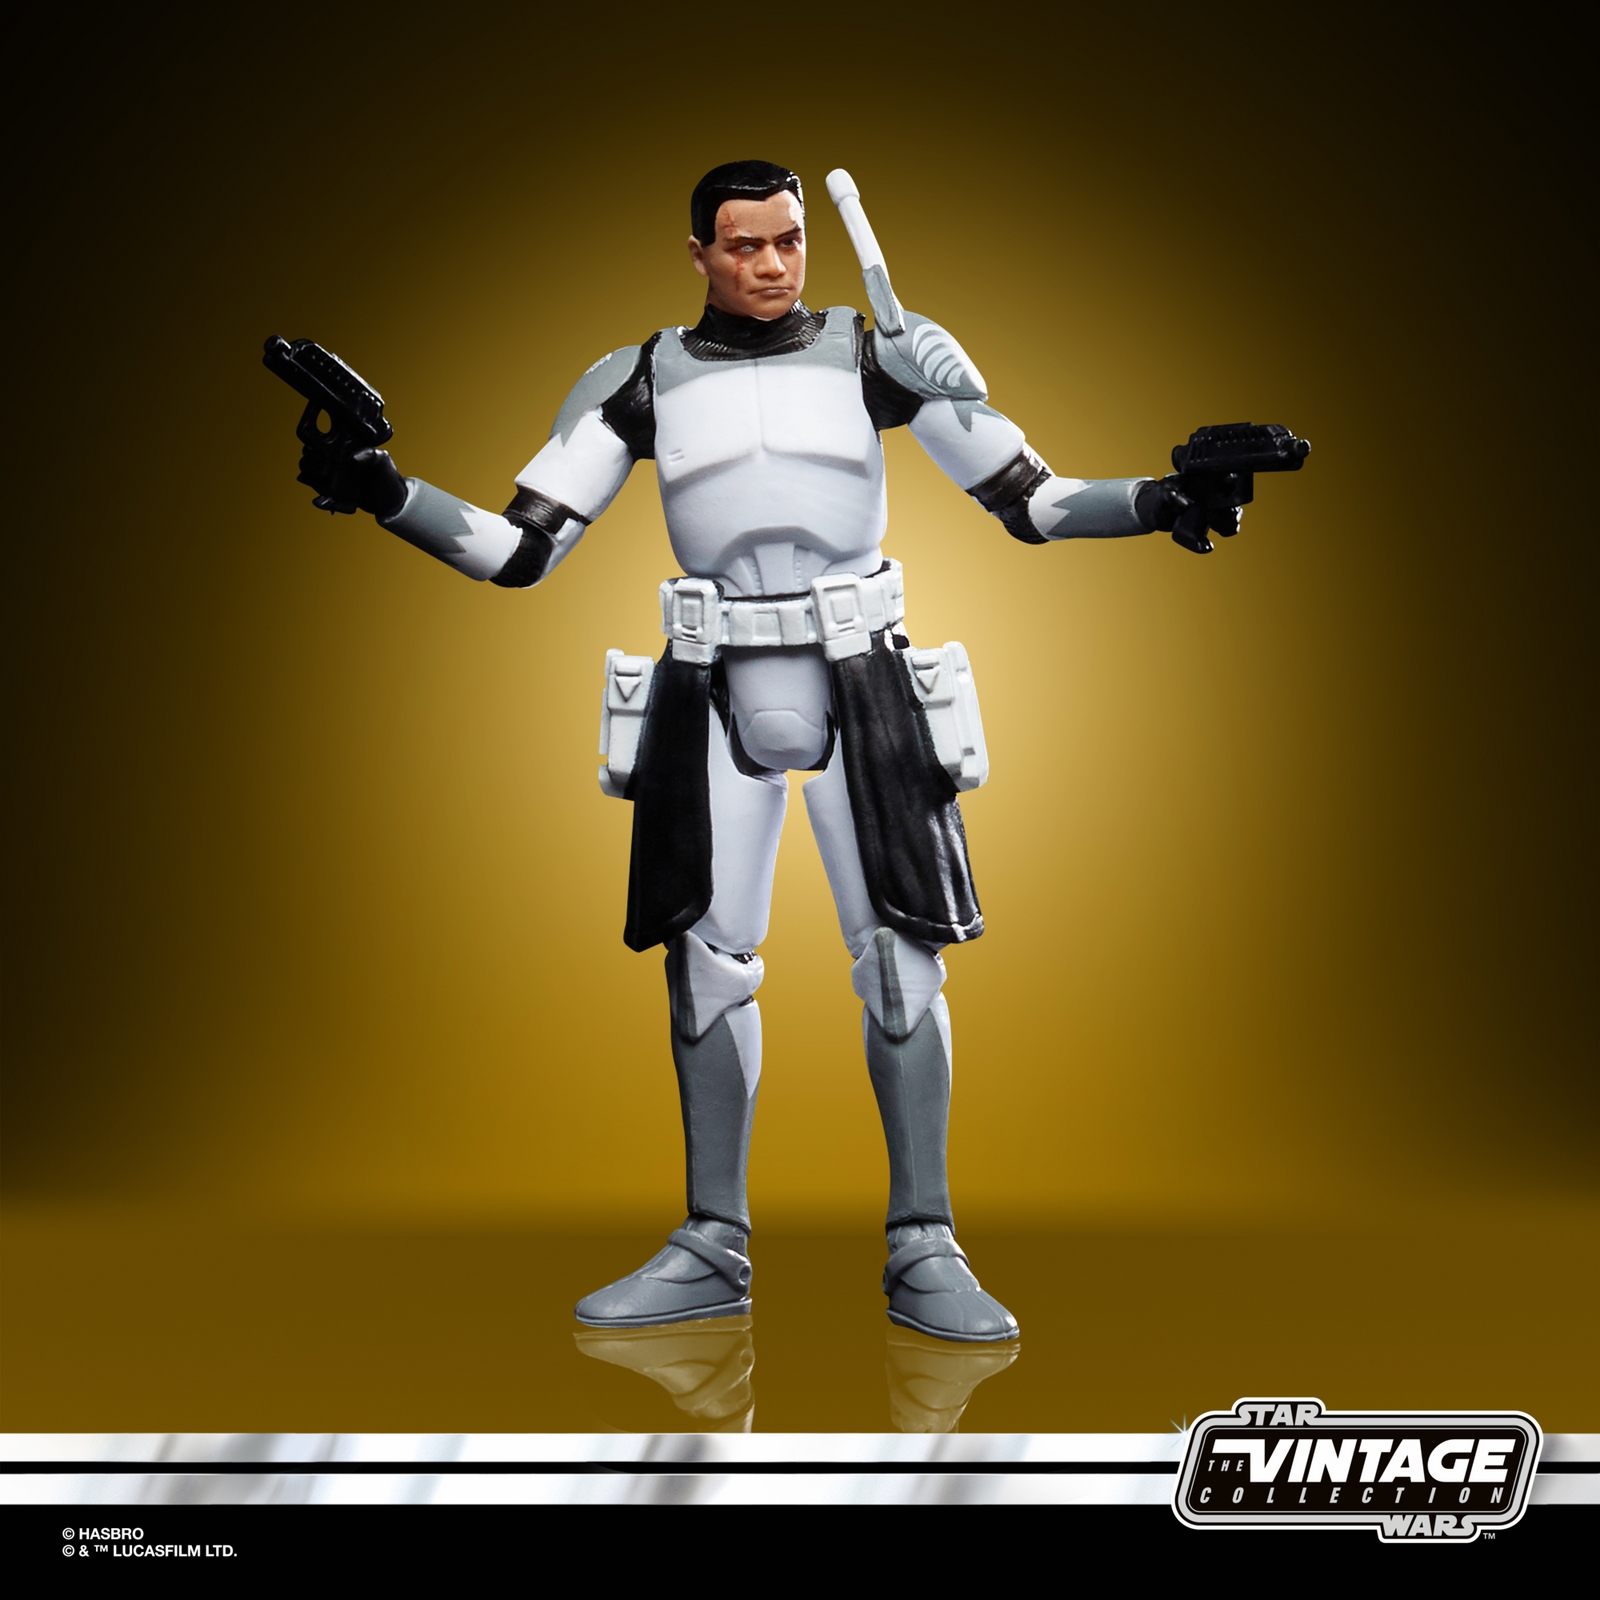 STAR WARS THE VINTAGE COLLECTION 3.75-INCH CLONE COMMANDER WOLFFE Figure - oop (3).jpg